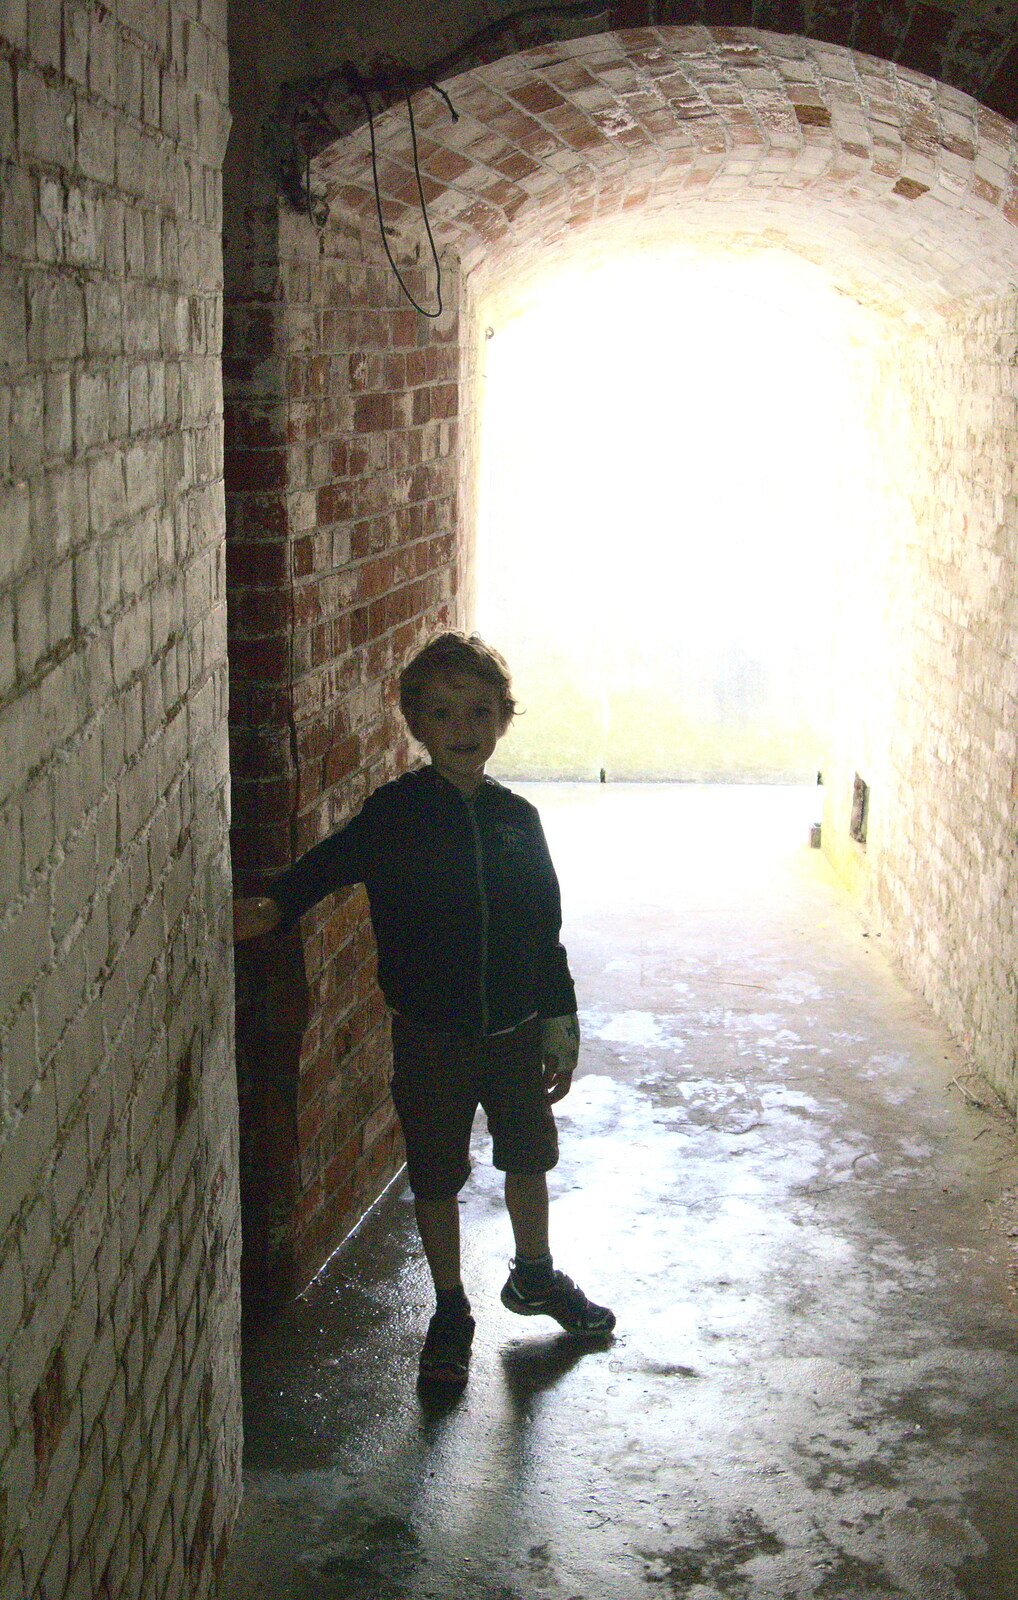 Fred in the magazine tunnels from A Trip to Hurst Castle, Keyhaven, Hampshire - 28th August 2015